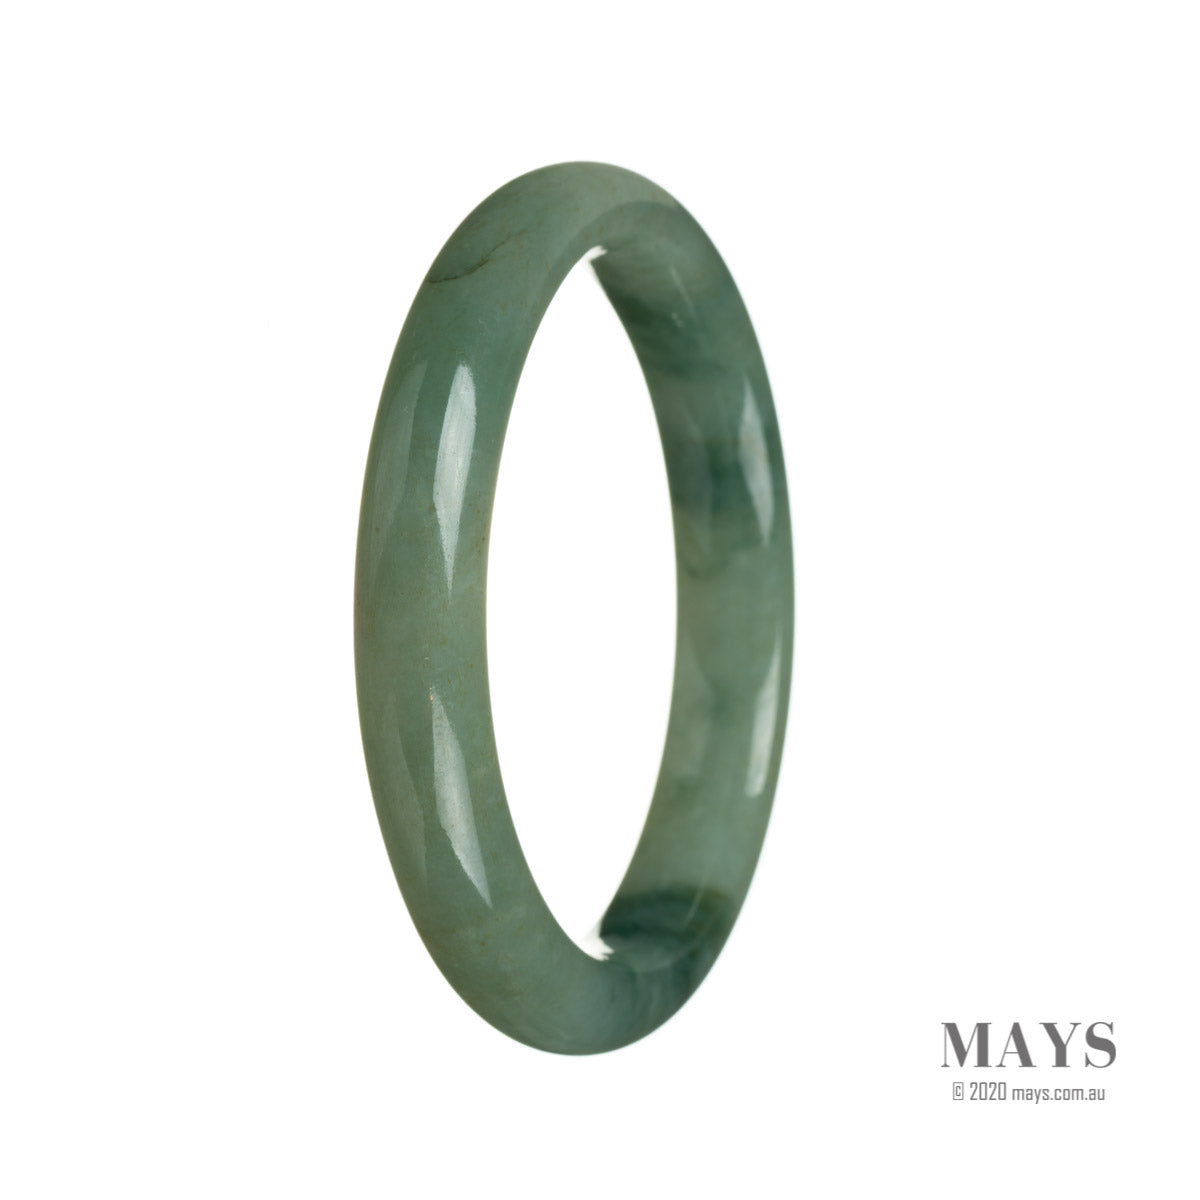 A beautiful green jadeite bangle with a semi-round shape, measuring 63mm in diameter. Crafted from genuine grade A jadeite, this bangle is a timeless and elegant piece from MAYS.